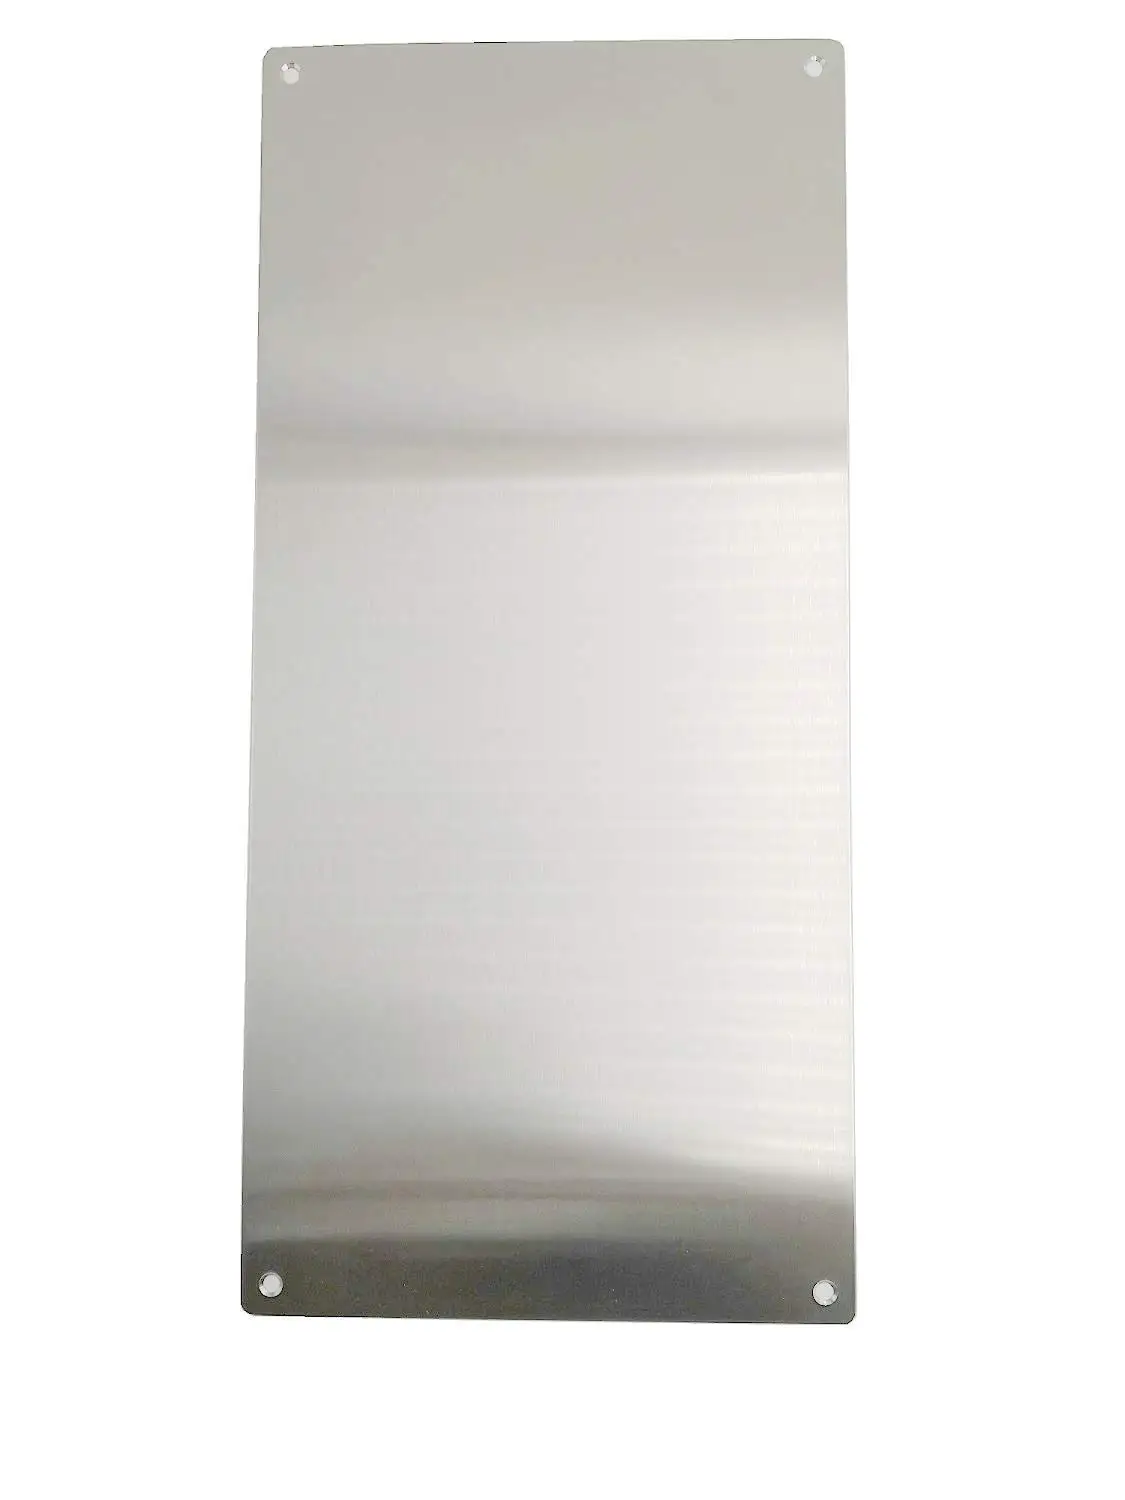 Satin Finish Rockwood 70A.32D Stainless Steel Standard Push Plate 12 Height x 3 Width x 0.050 Thick Four Beveled Edges